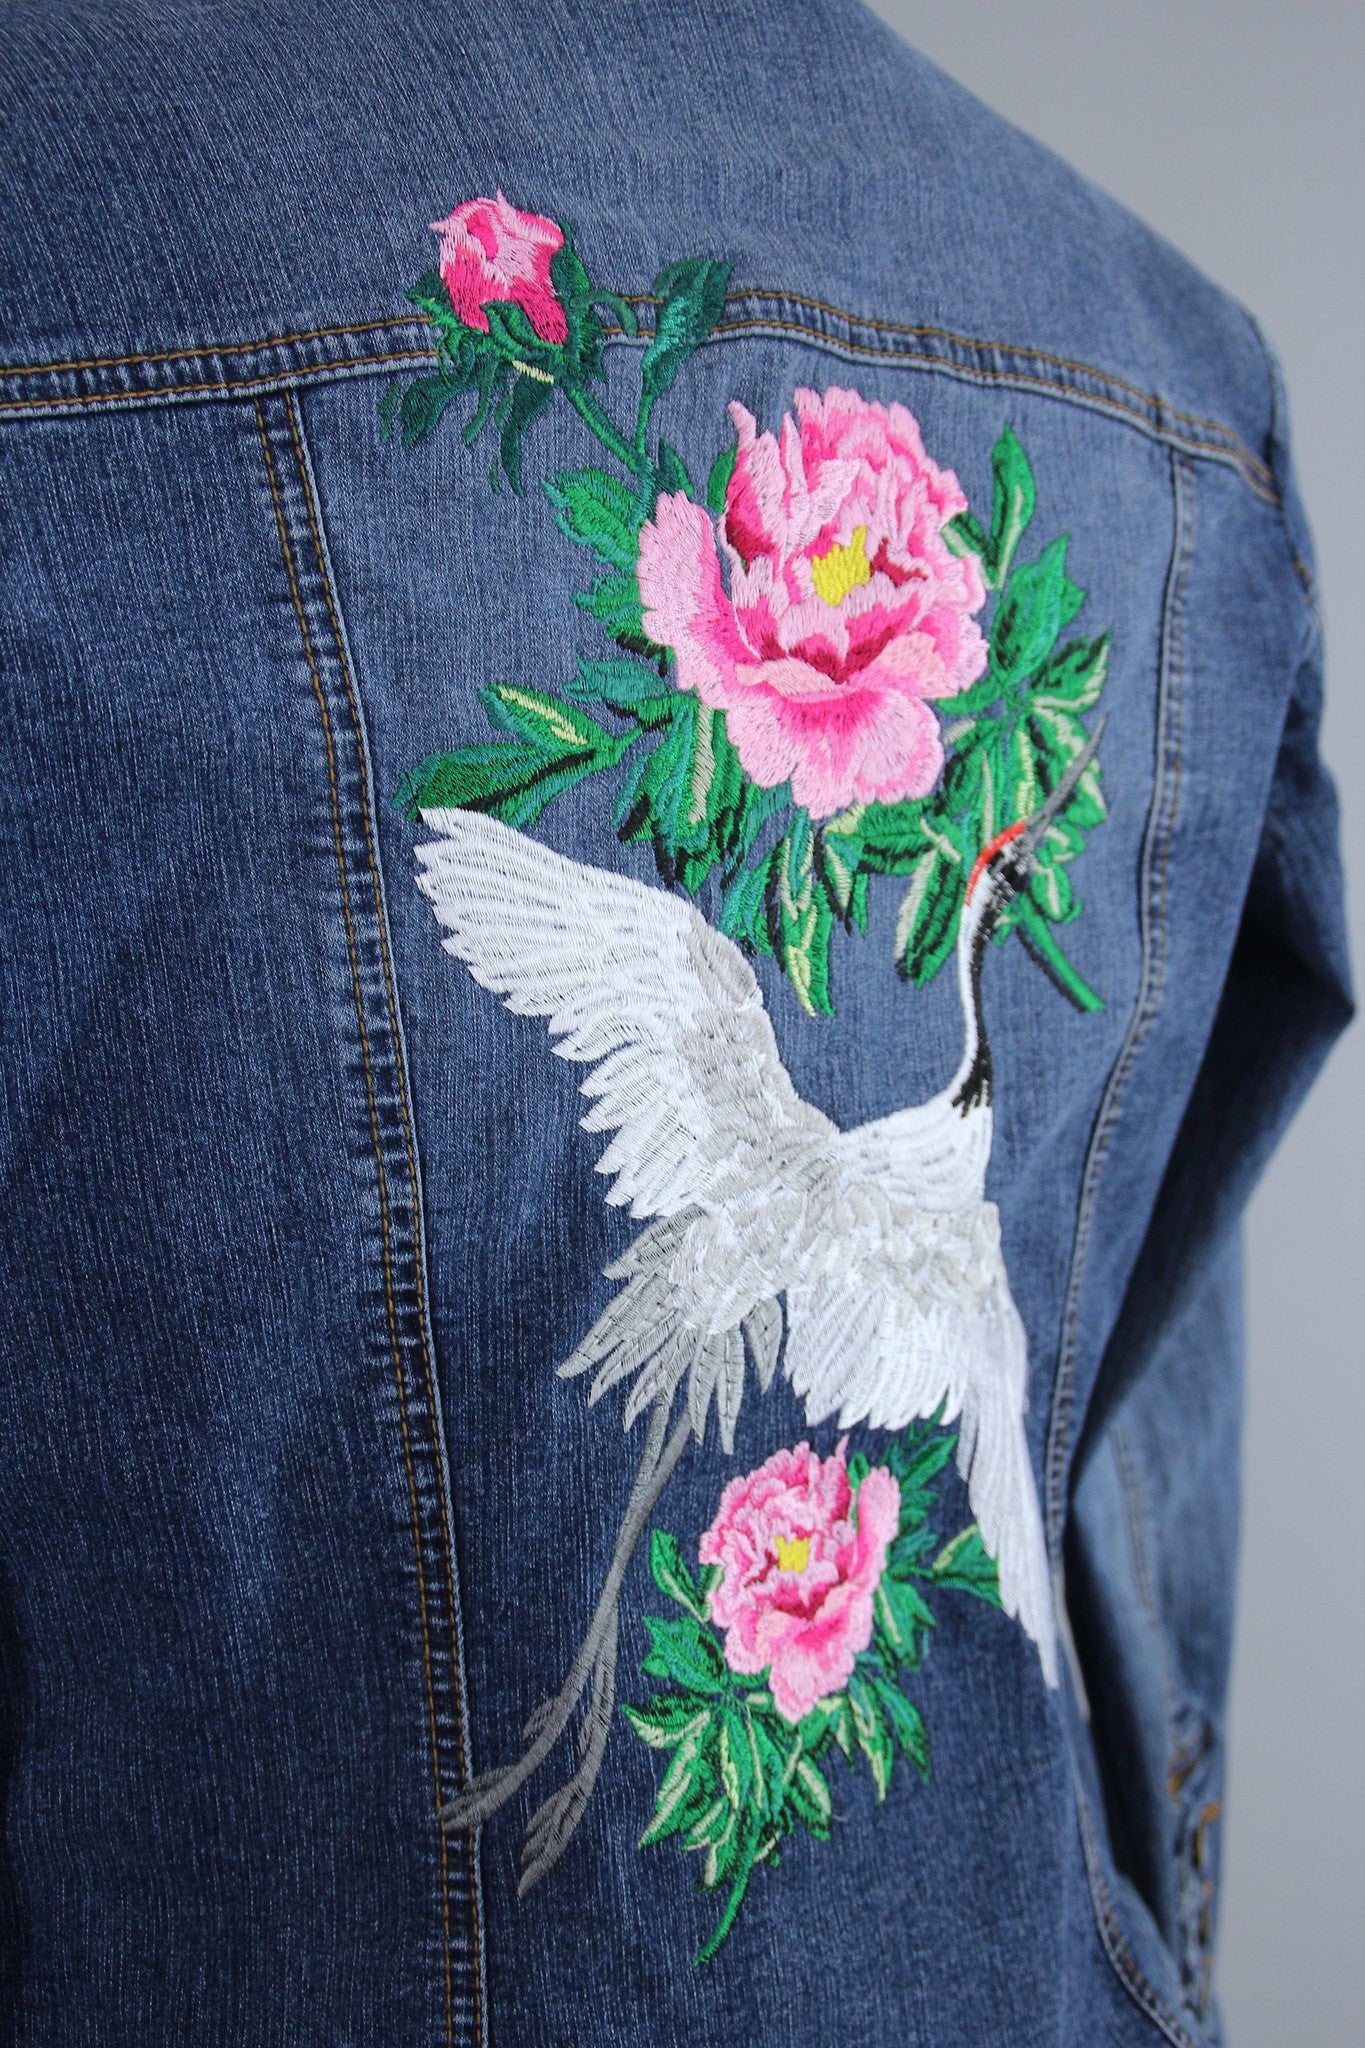 Embroidered Denim Jacket / Asian Crane Bird & Peony Floral Embroidery - ThisBlueBird